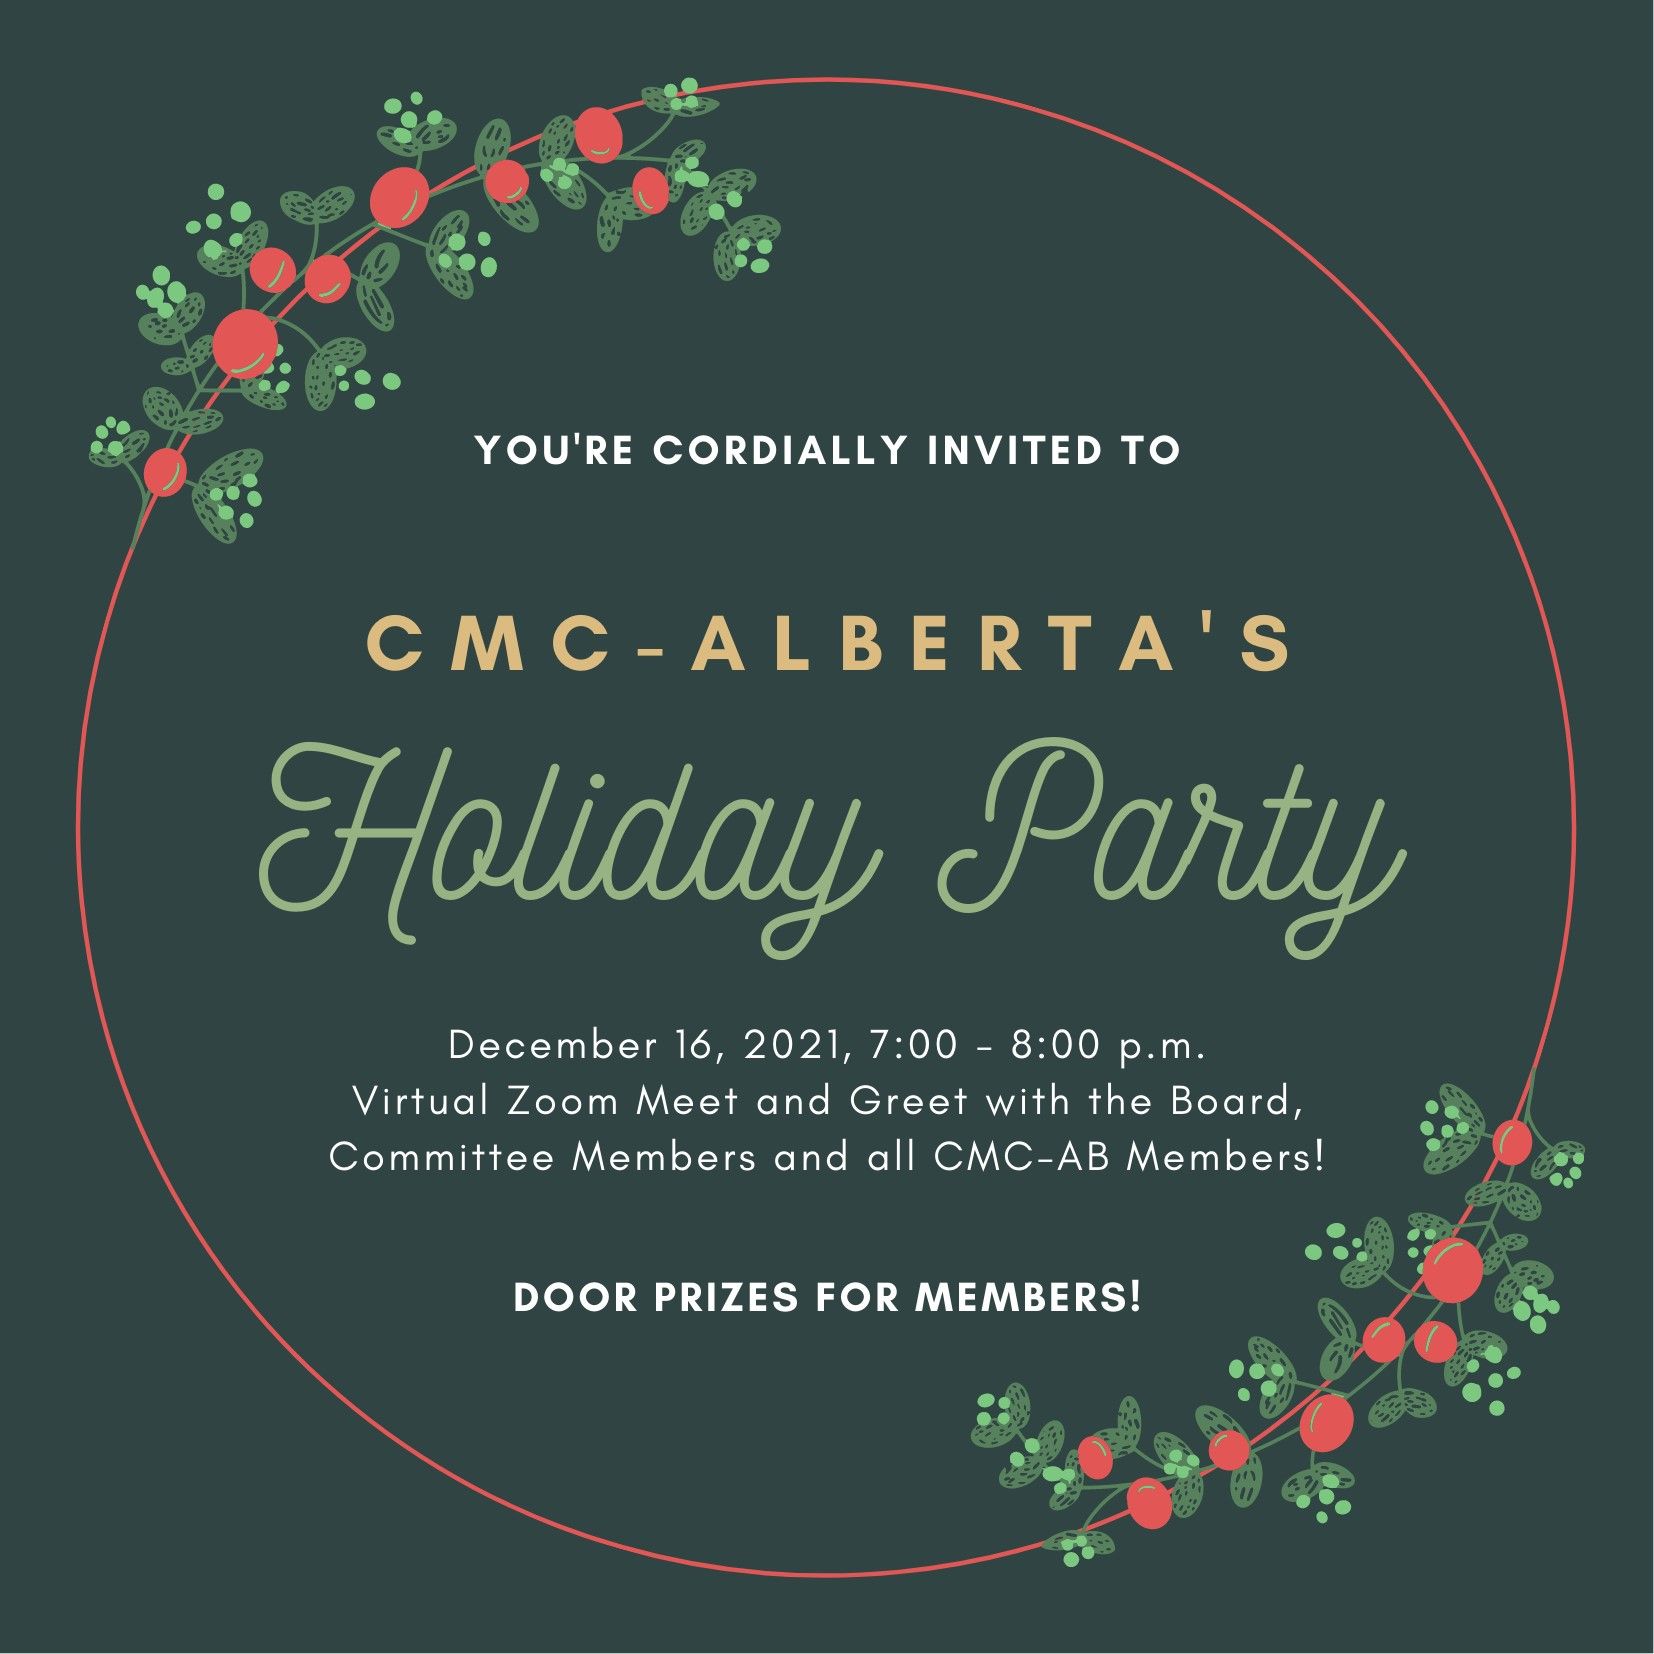 Join Us for our December 16th Virtual Holiday Party & Door Prizes!